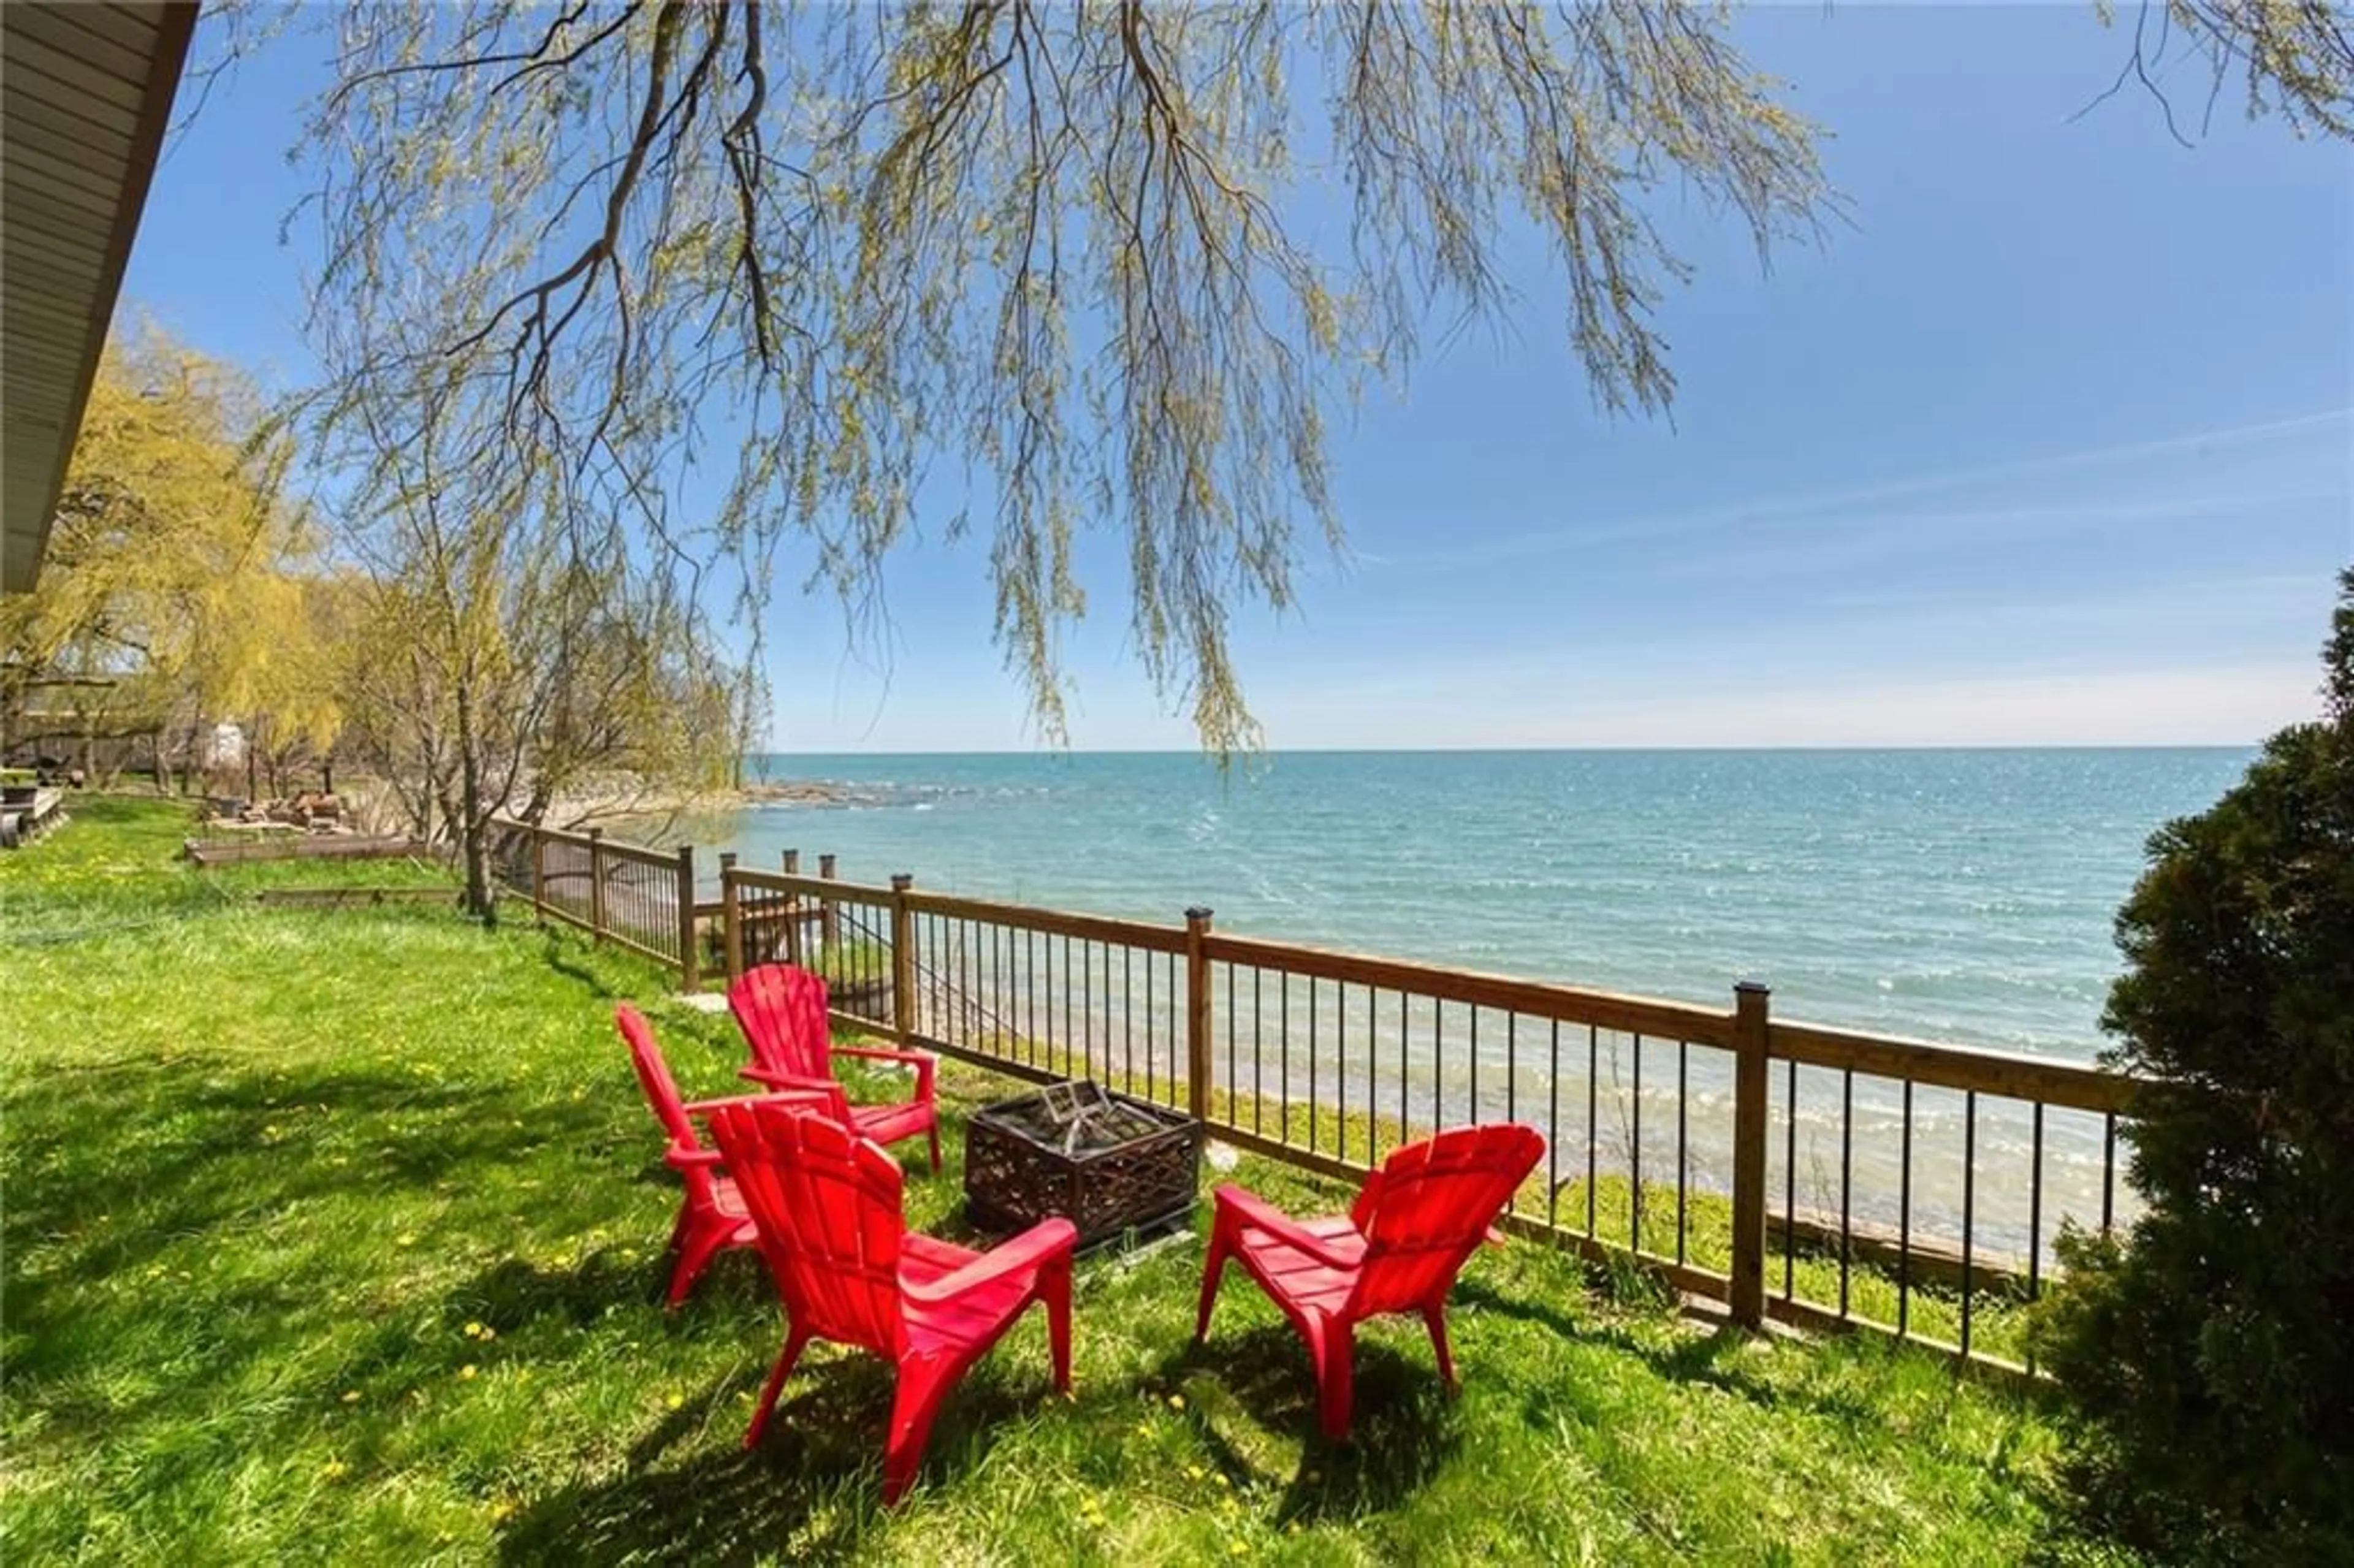 Lakeview for 90 Lakeshore Rd, Selkirk Ontario N0A 1P0